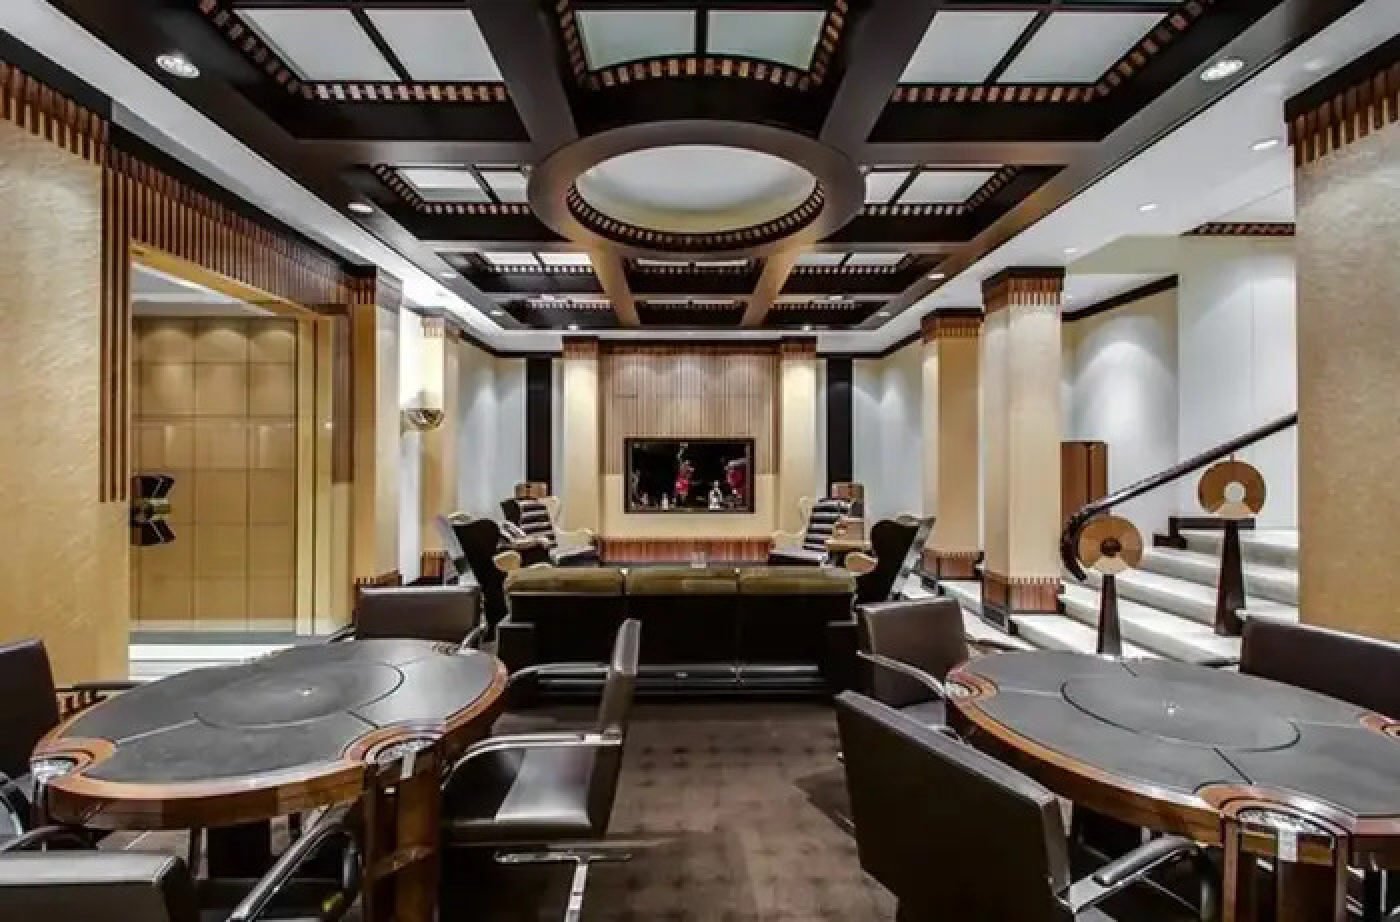 The cigar room features plenty of card tables for gambling. Photo: Concierge Auctions